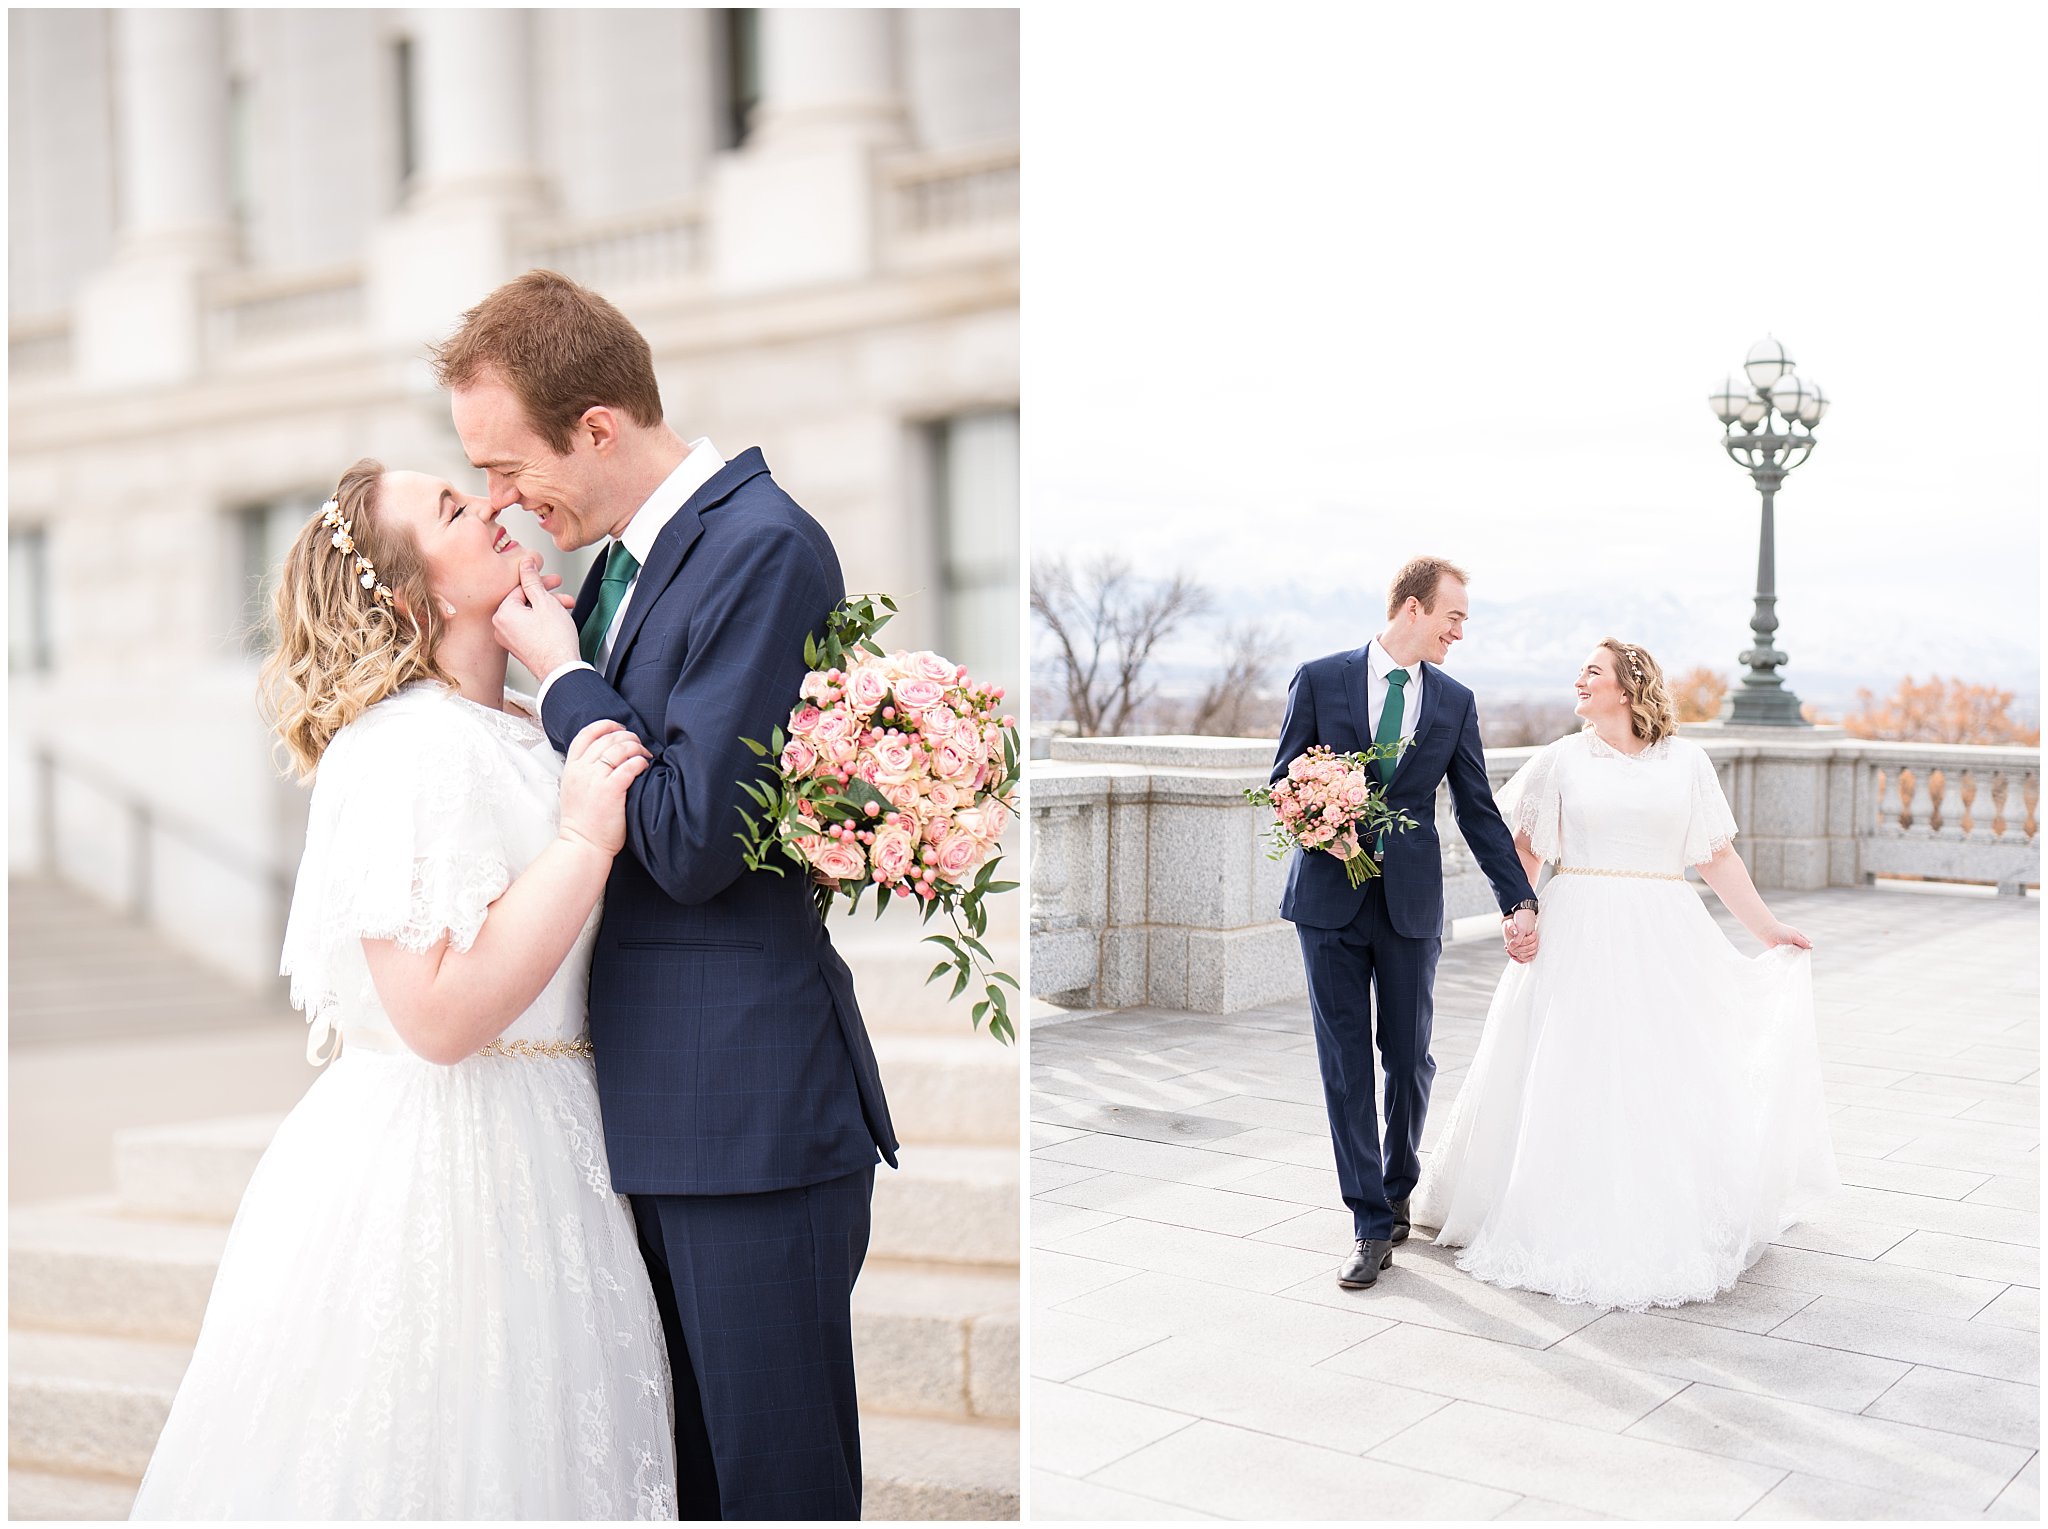 Utah State Capitol Building Wedding | Salt Lake City Wedding | Bride and groom walking and kissing | Jessie and Dallin Photography